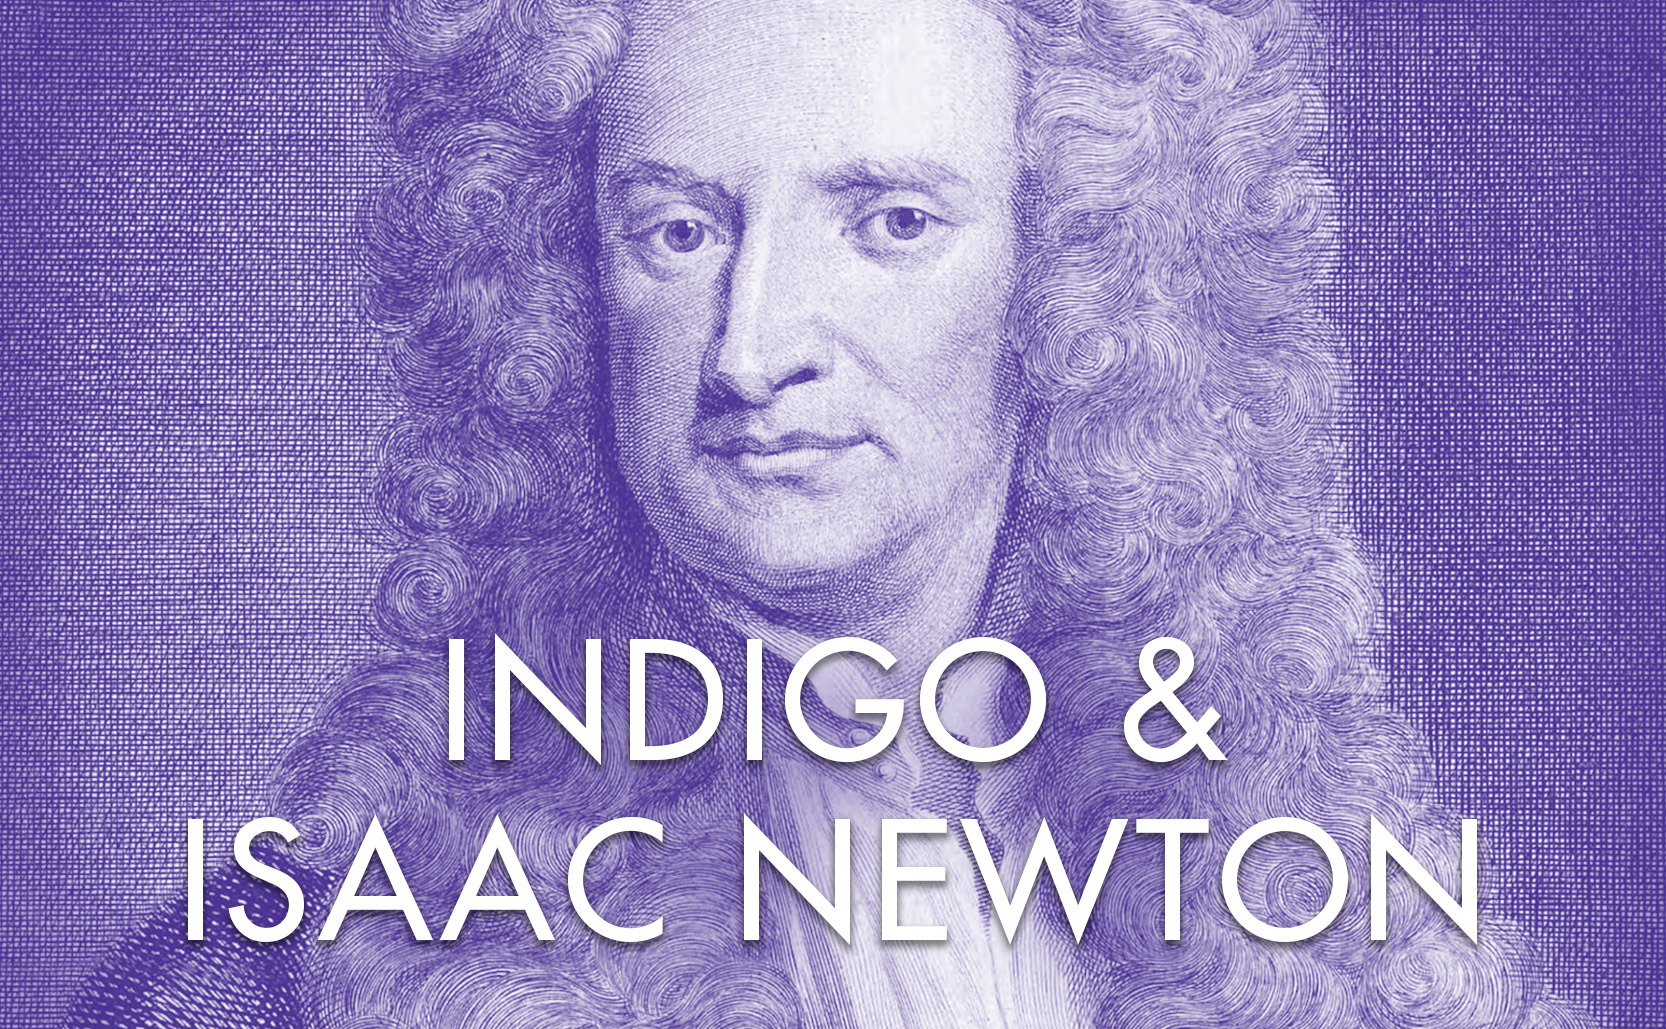 You are currently viewing Indigo & Isaac Newton